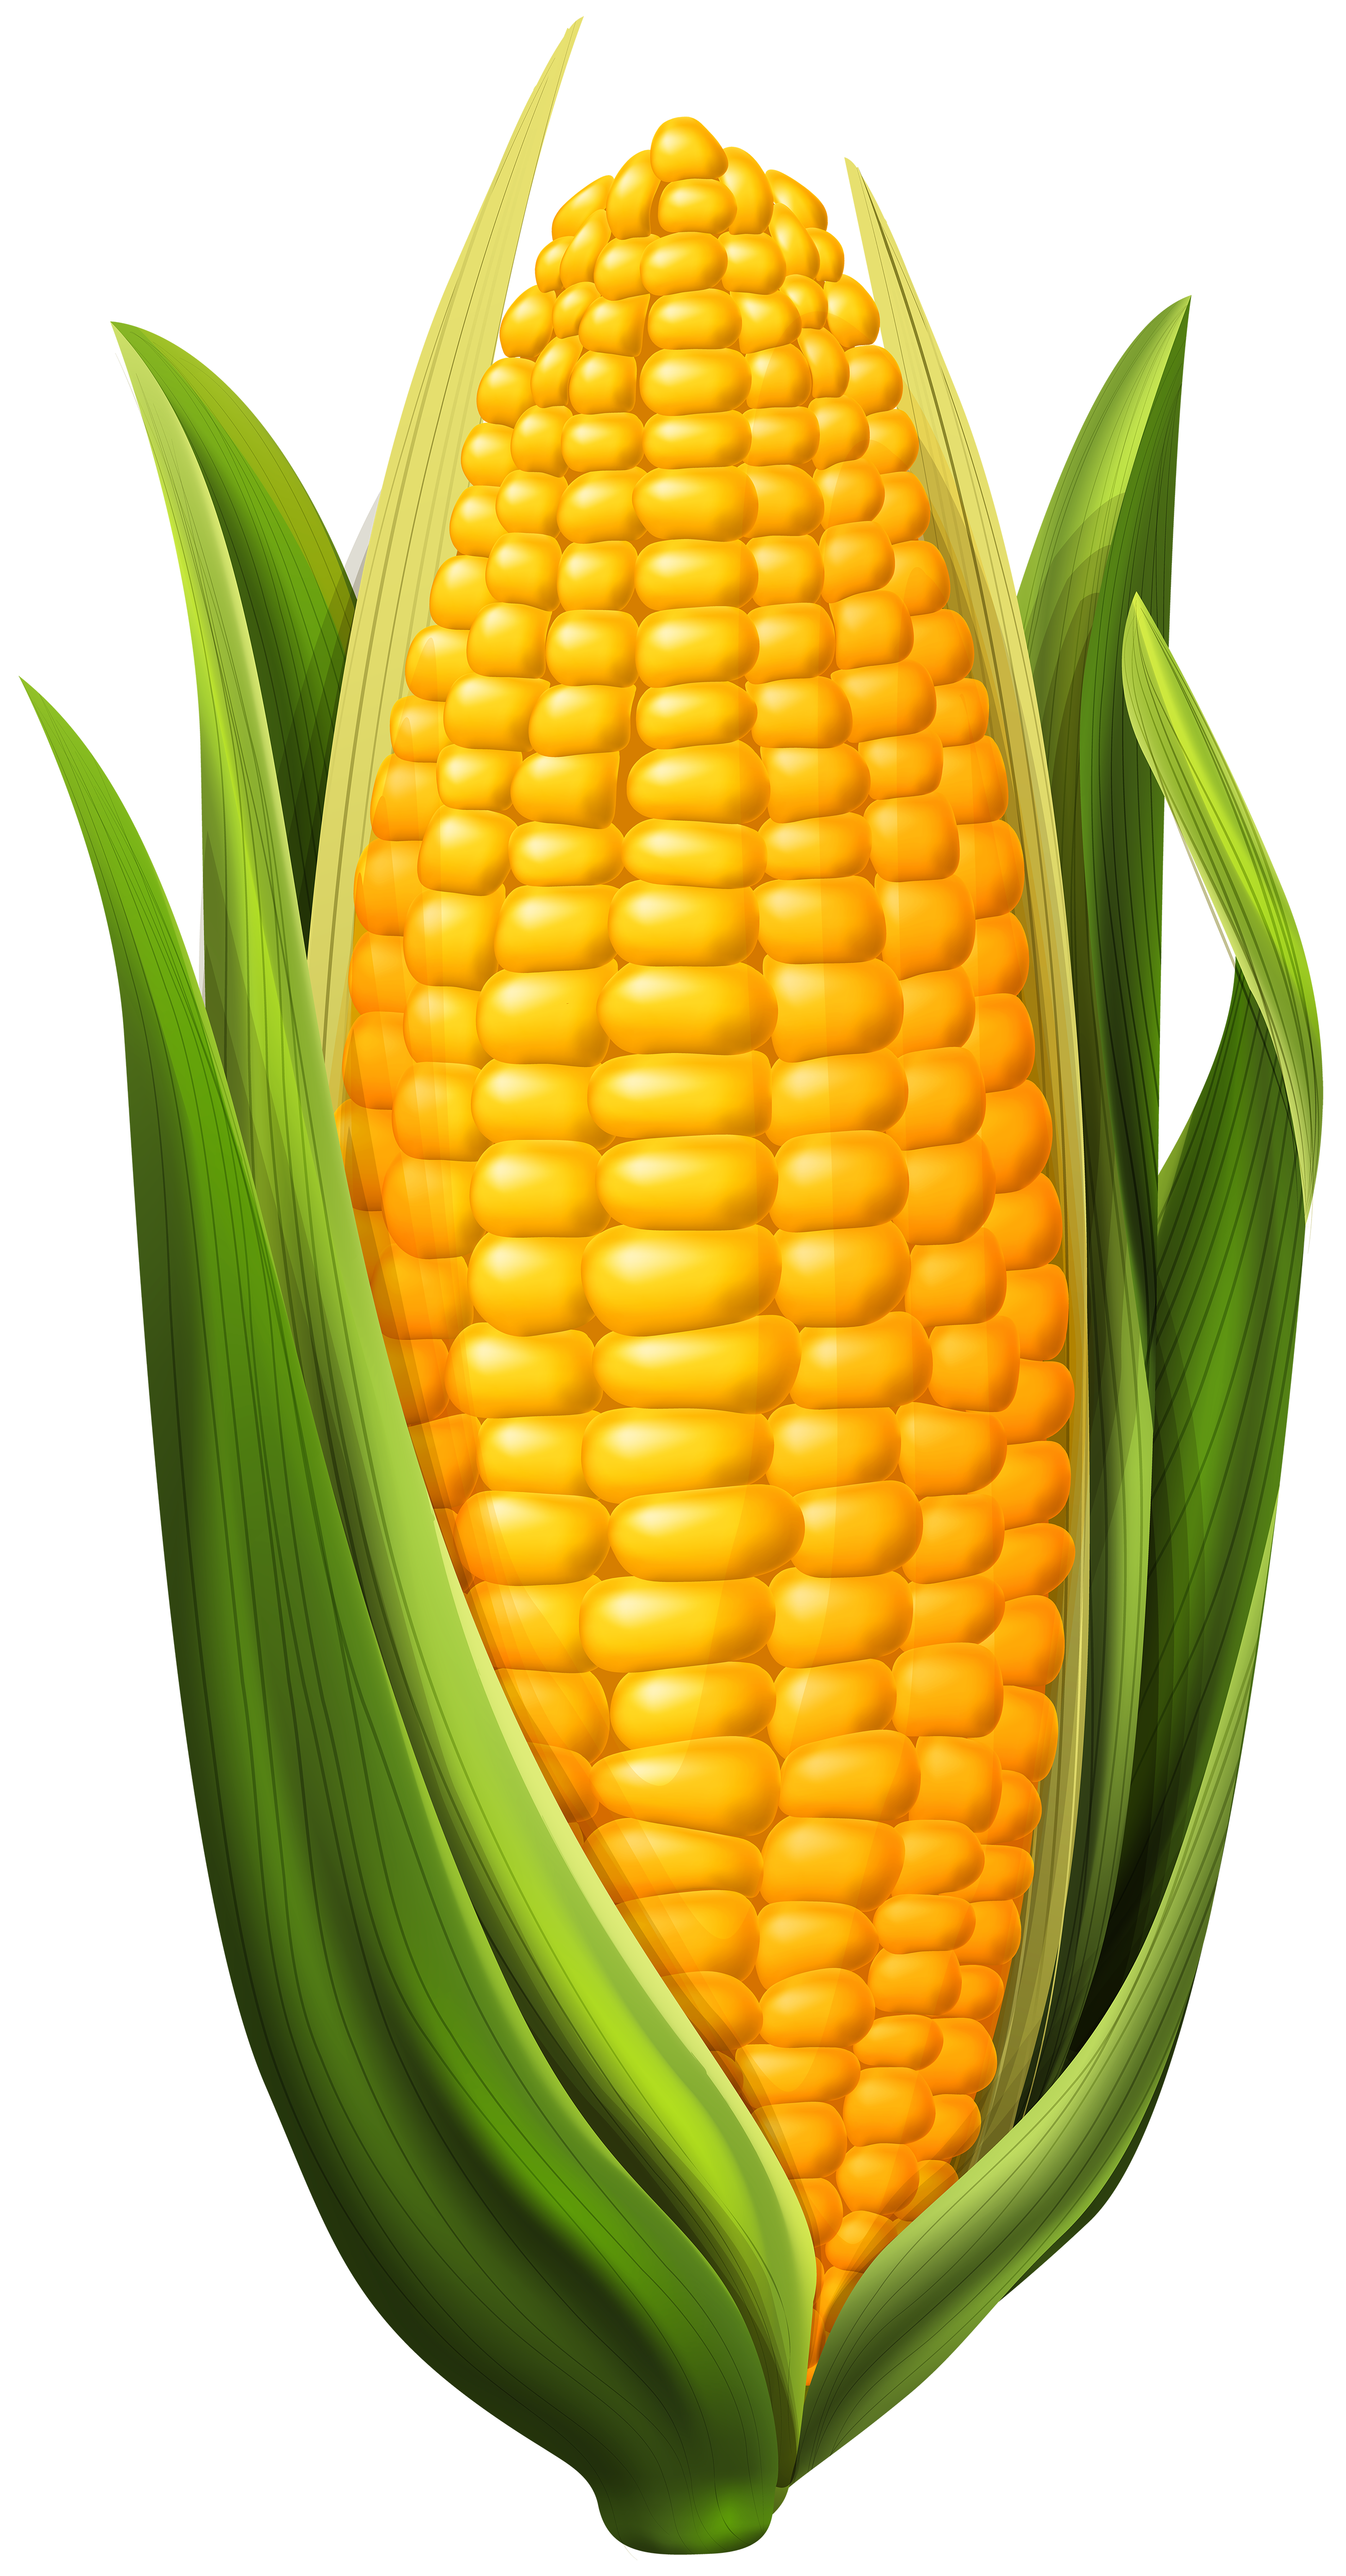 Corn PNG Clip Art Image | Gallery Yopriceville - High-Quality ...